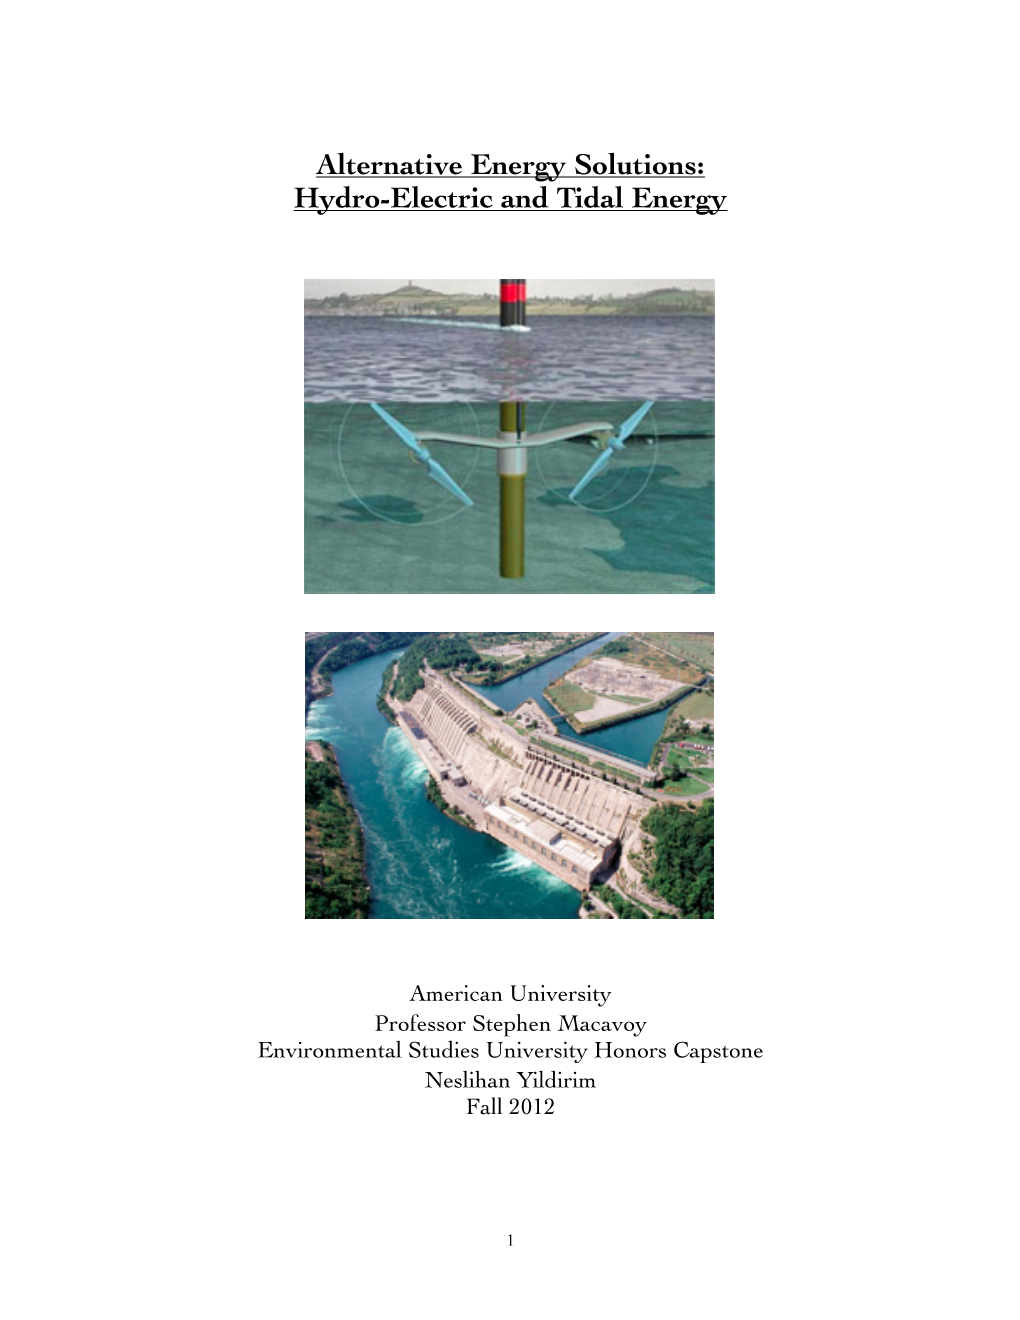 Alternative Energy Solutions: Hydro-Electric and Tidal Energy